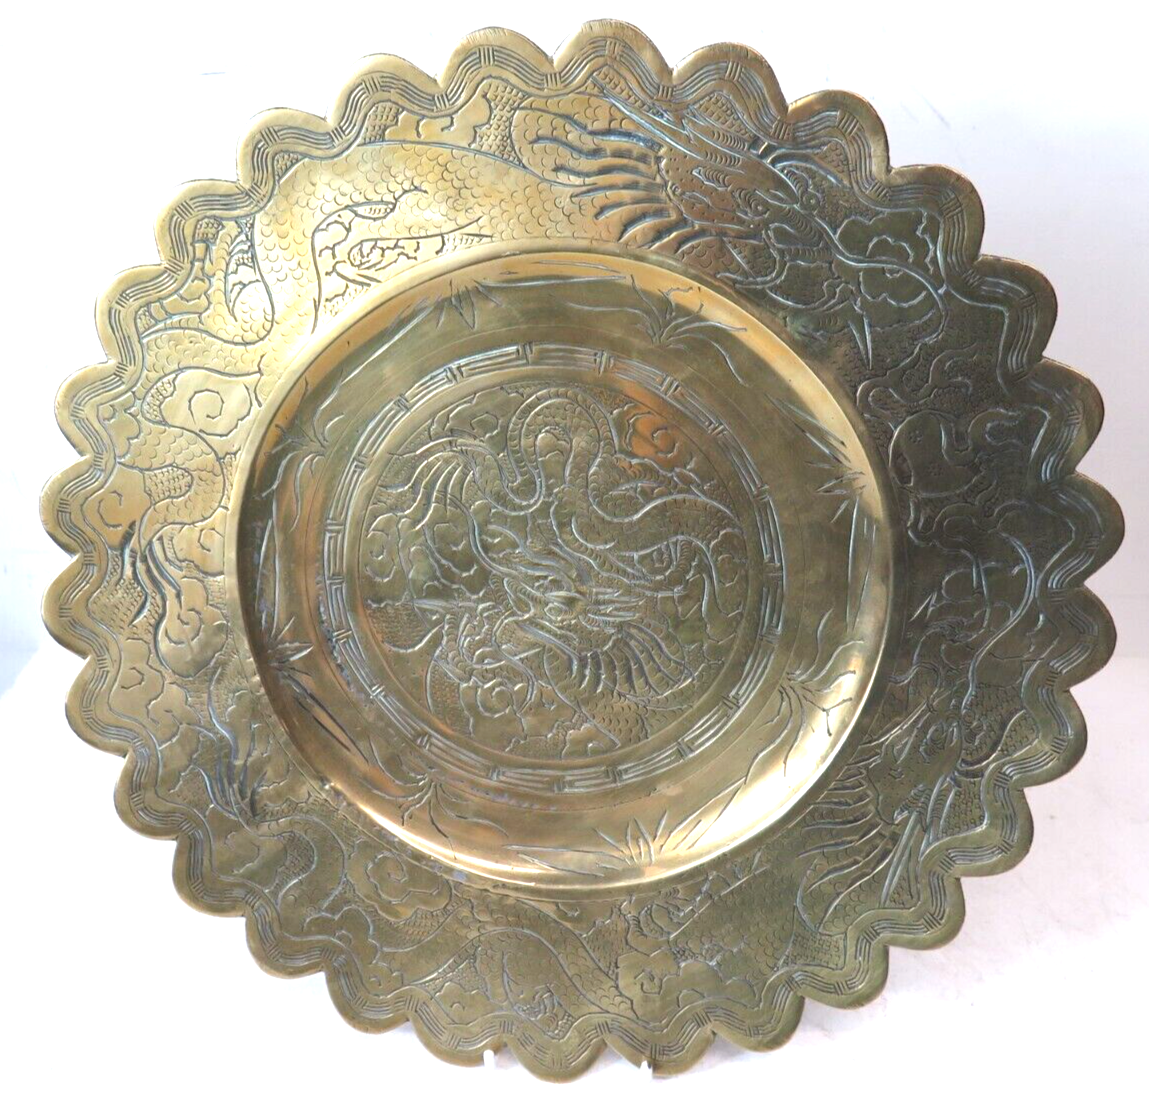 Antique Valuations: Large Brass / Bronze Chinese Dish Antique Early 1900's 33cm 1.1kg Charger Dragon